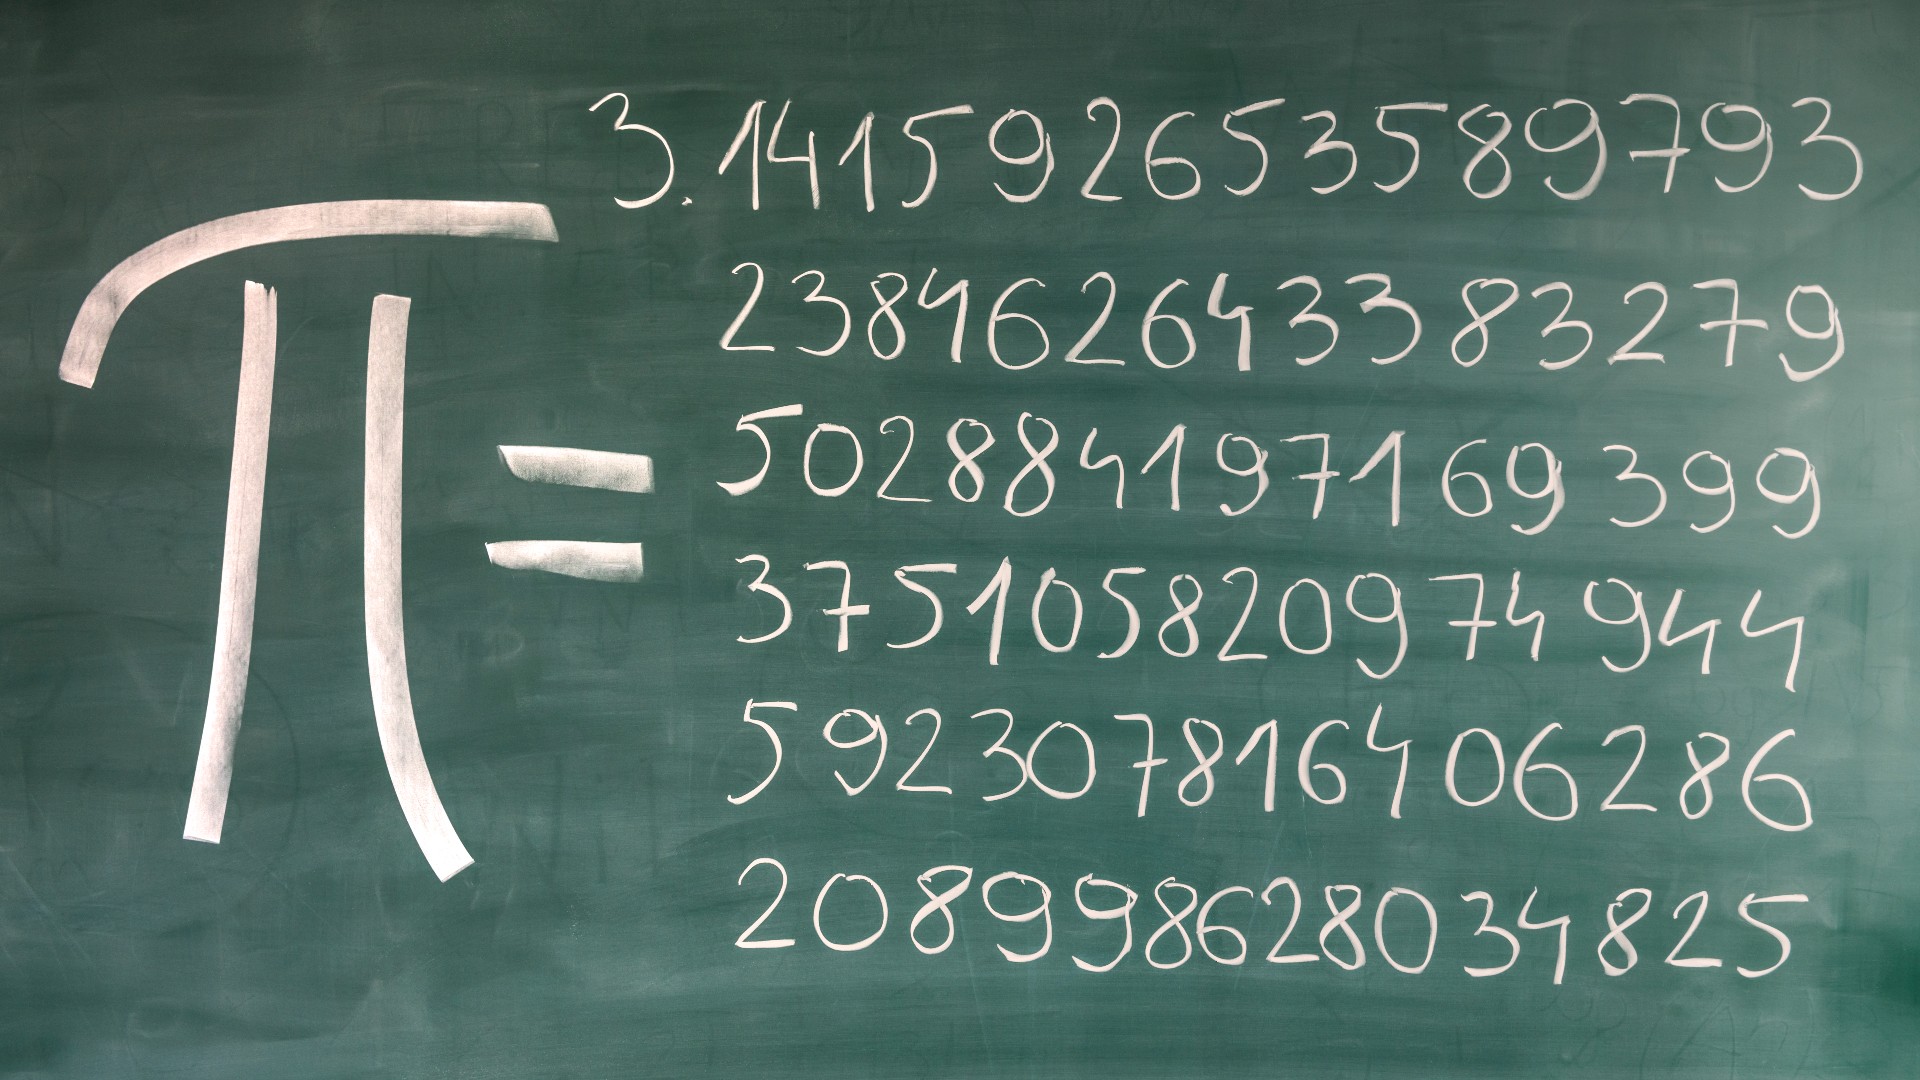 How do we keep finding extra digits of pi?